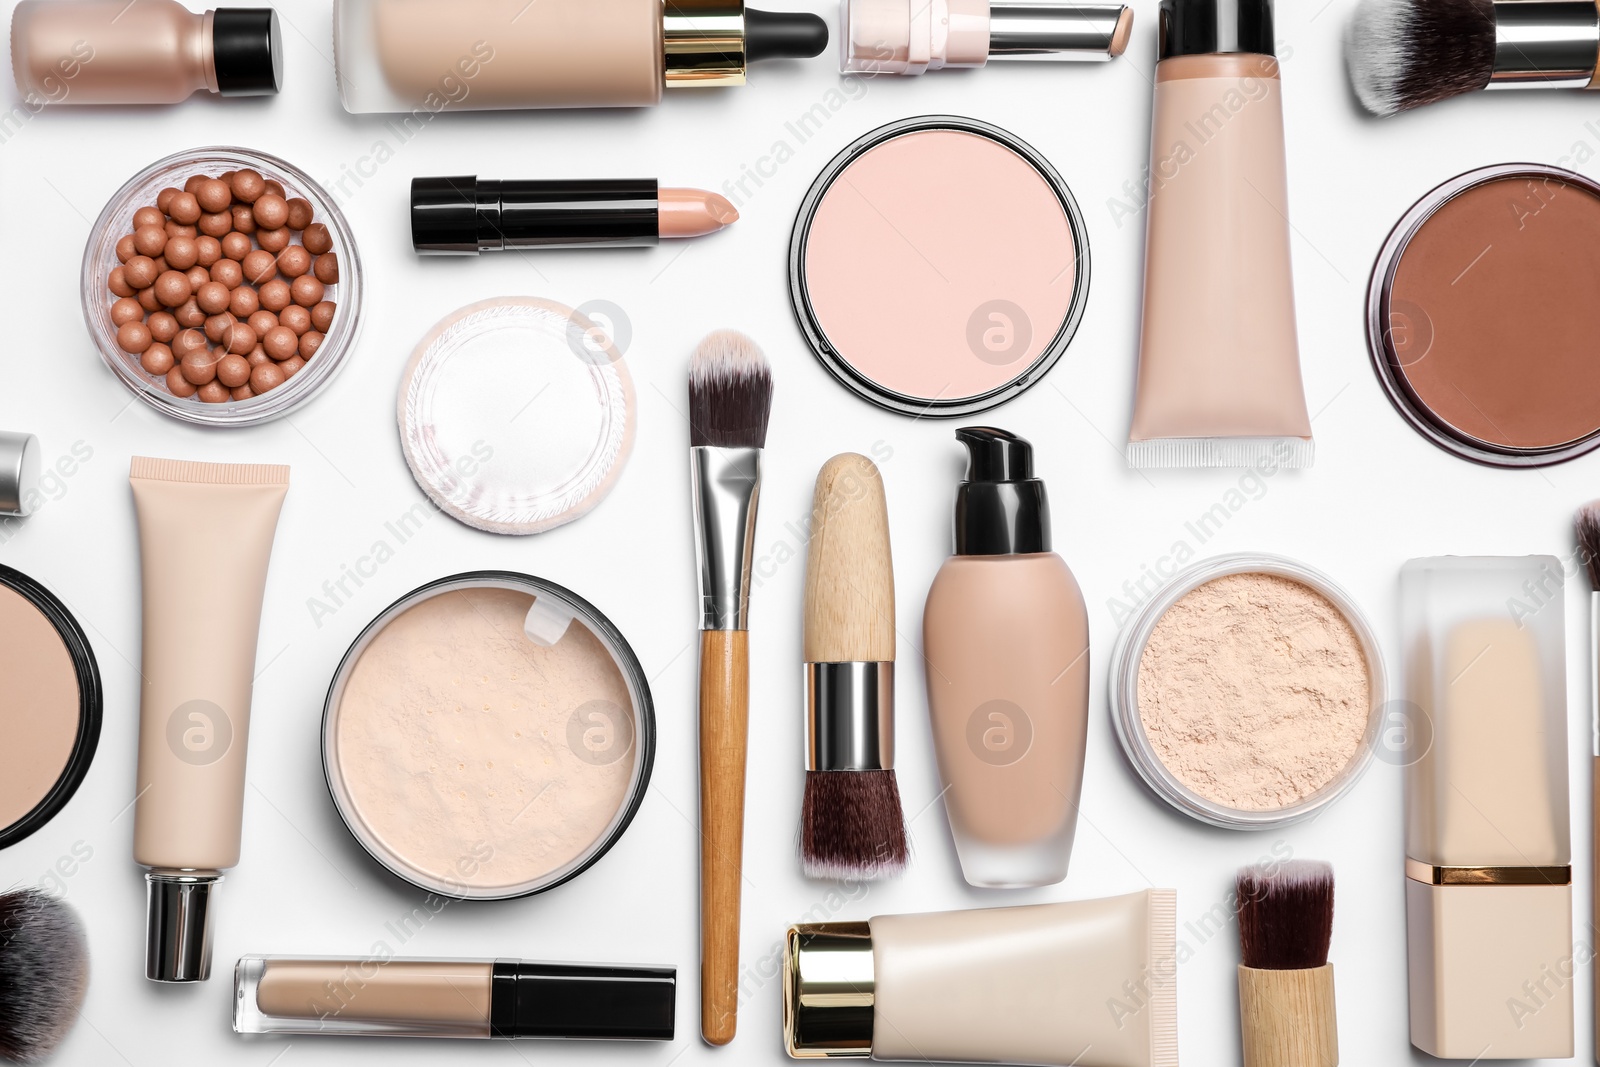 Photo of Face powders and other makeup products on white background, flat lay